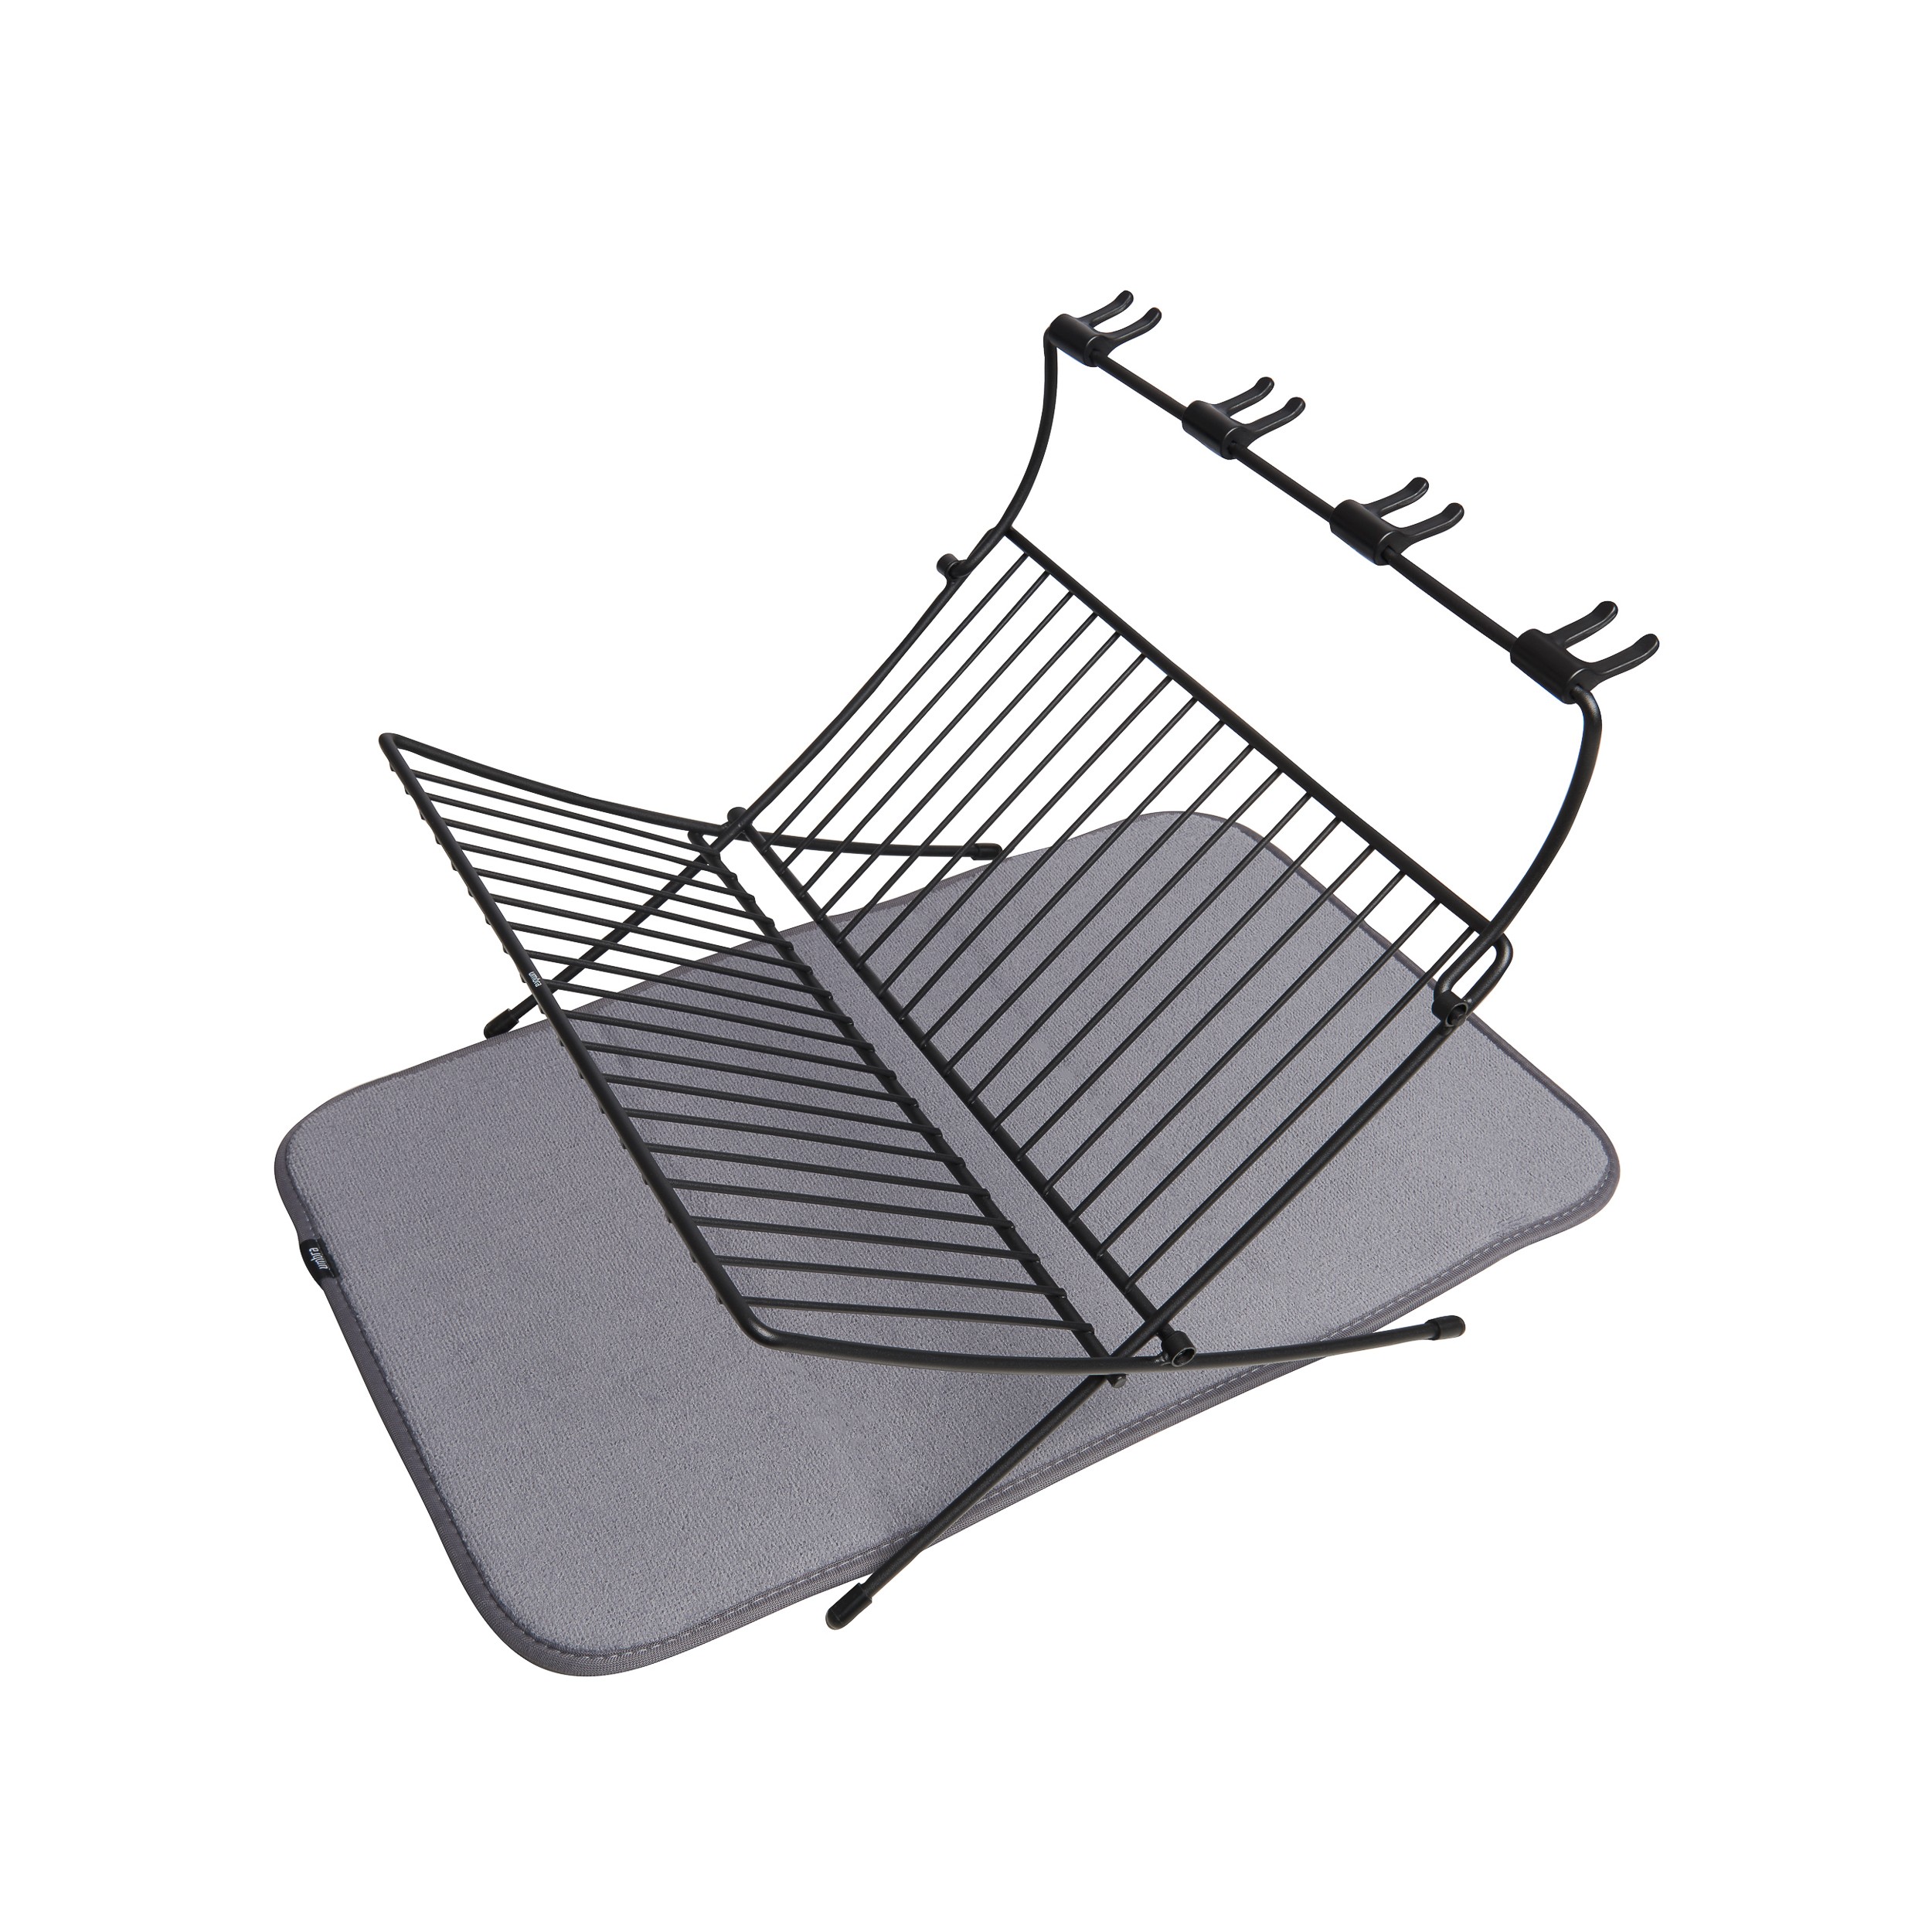 Xdry Collapsible Countertop Dish Rack